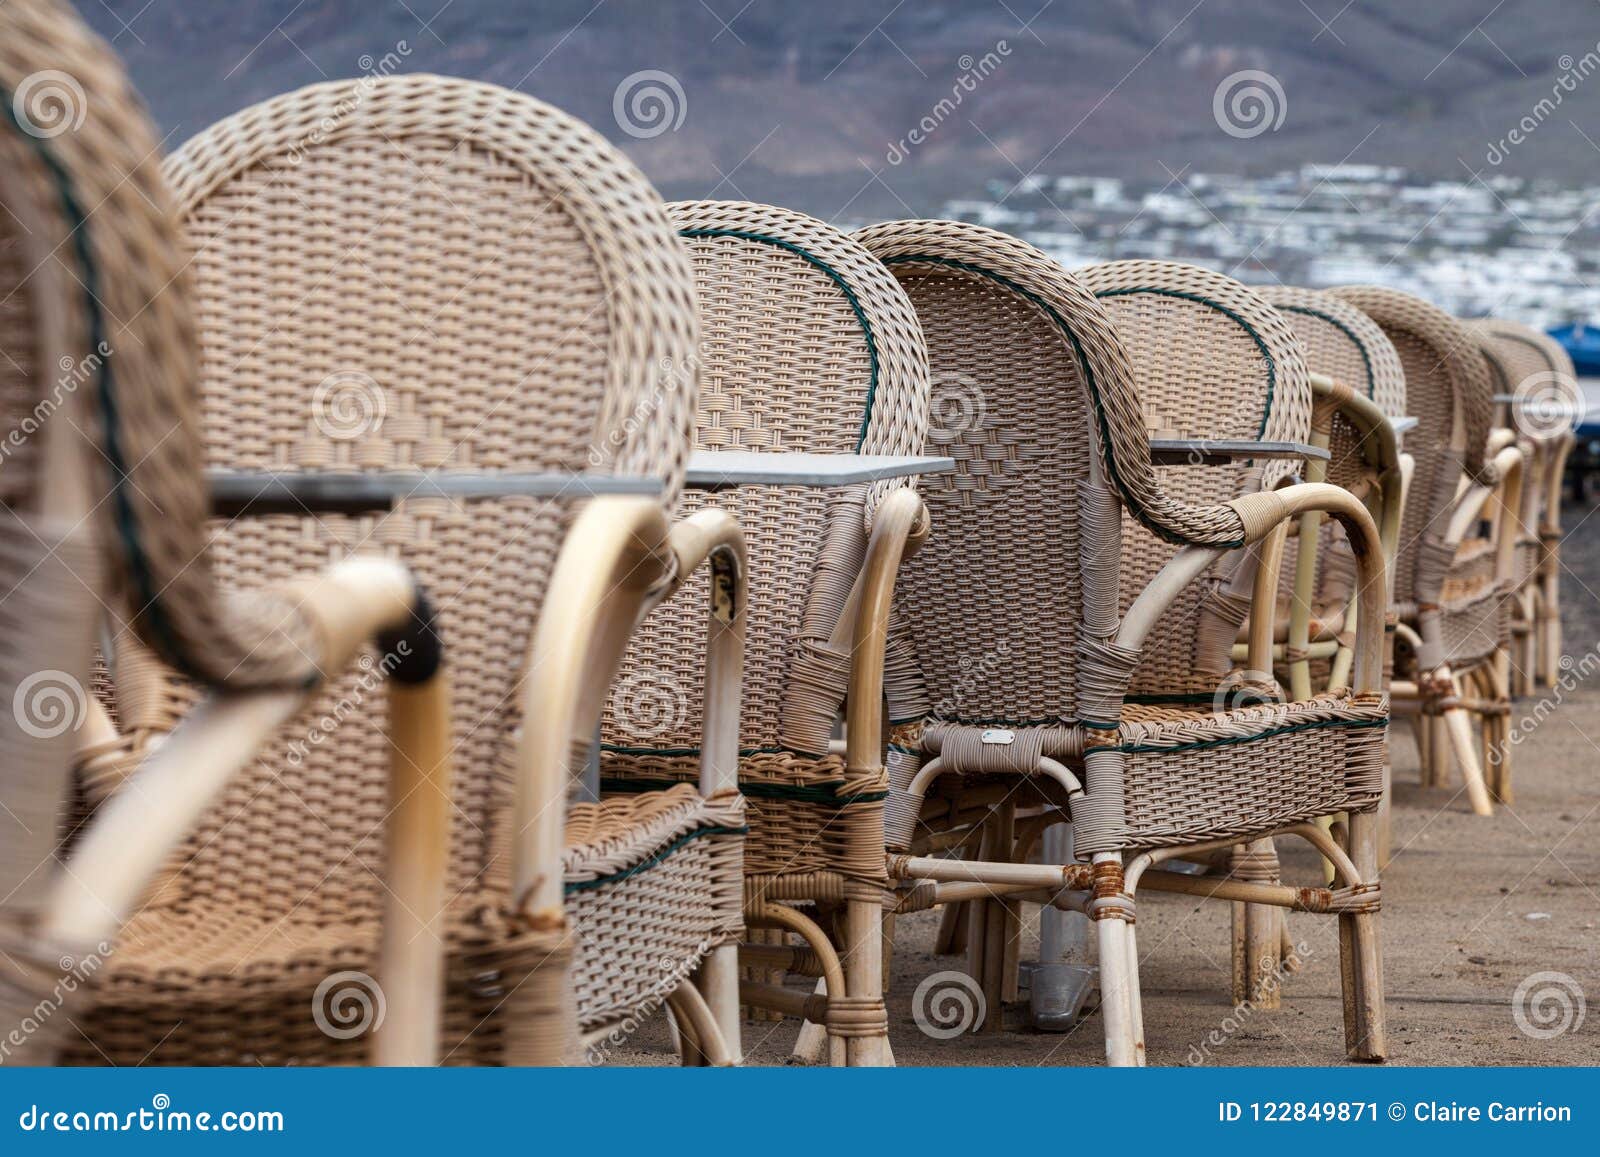 caleta de famara/spain - february 2, 2018: chairs and tables of an empty outdoor restaurant with the sea in the background